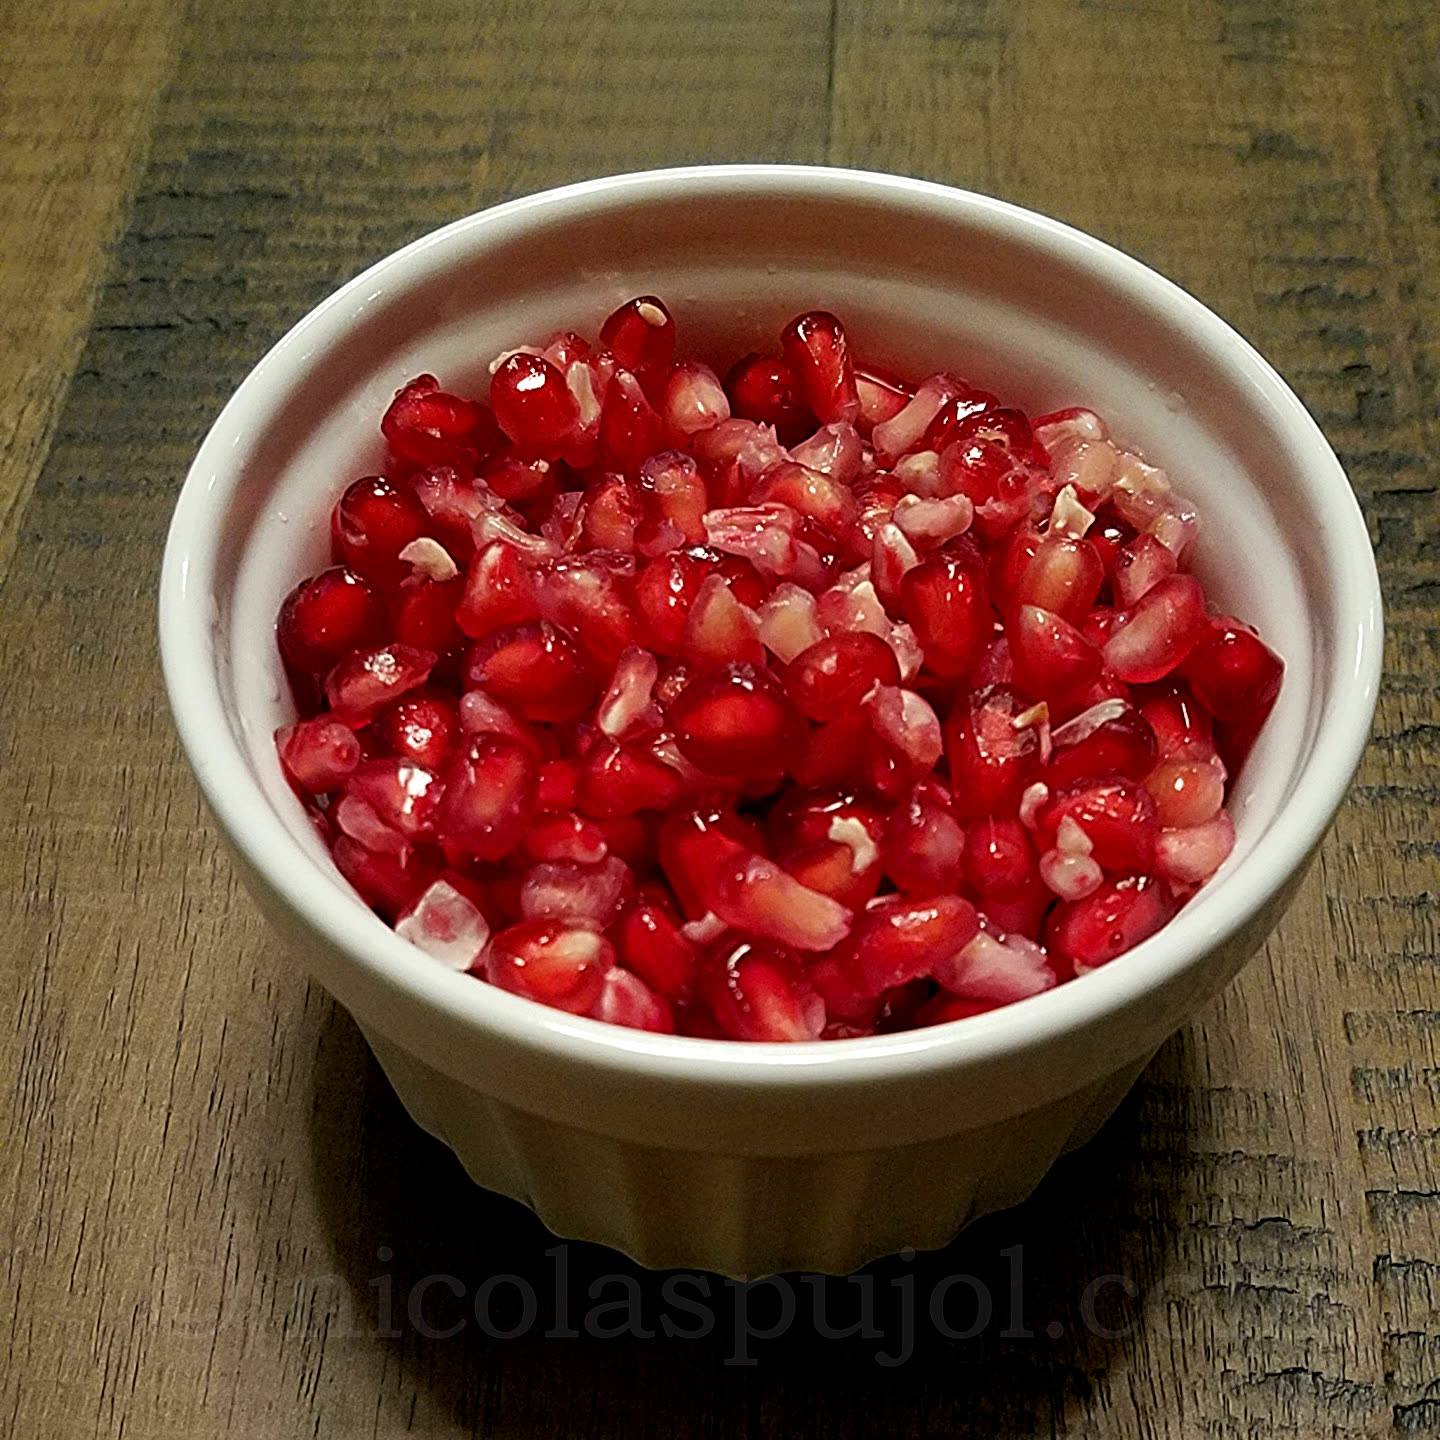 How to easily extract pomegranate seeds